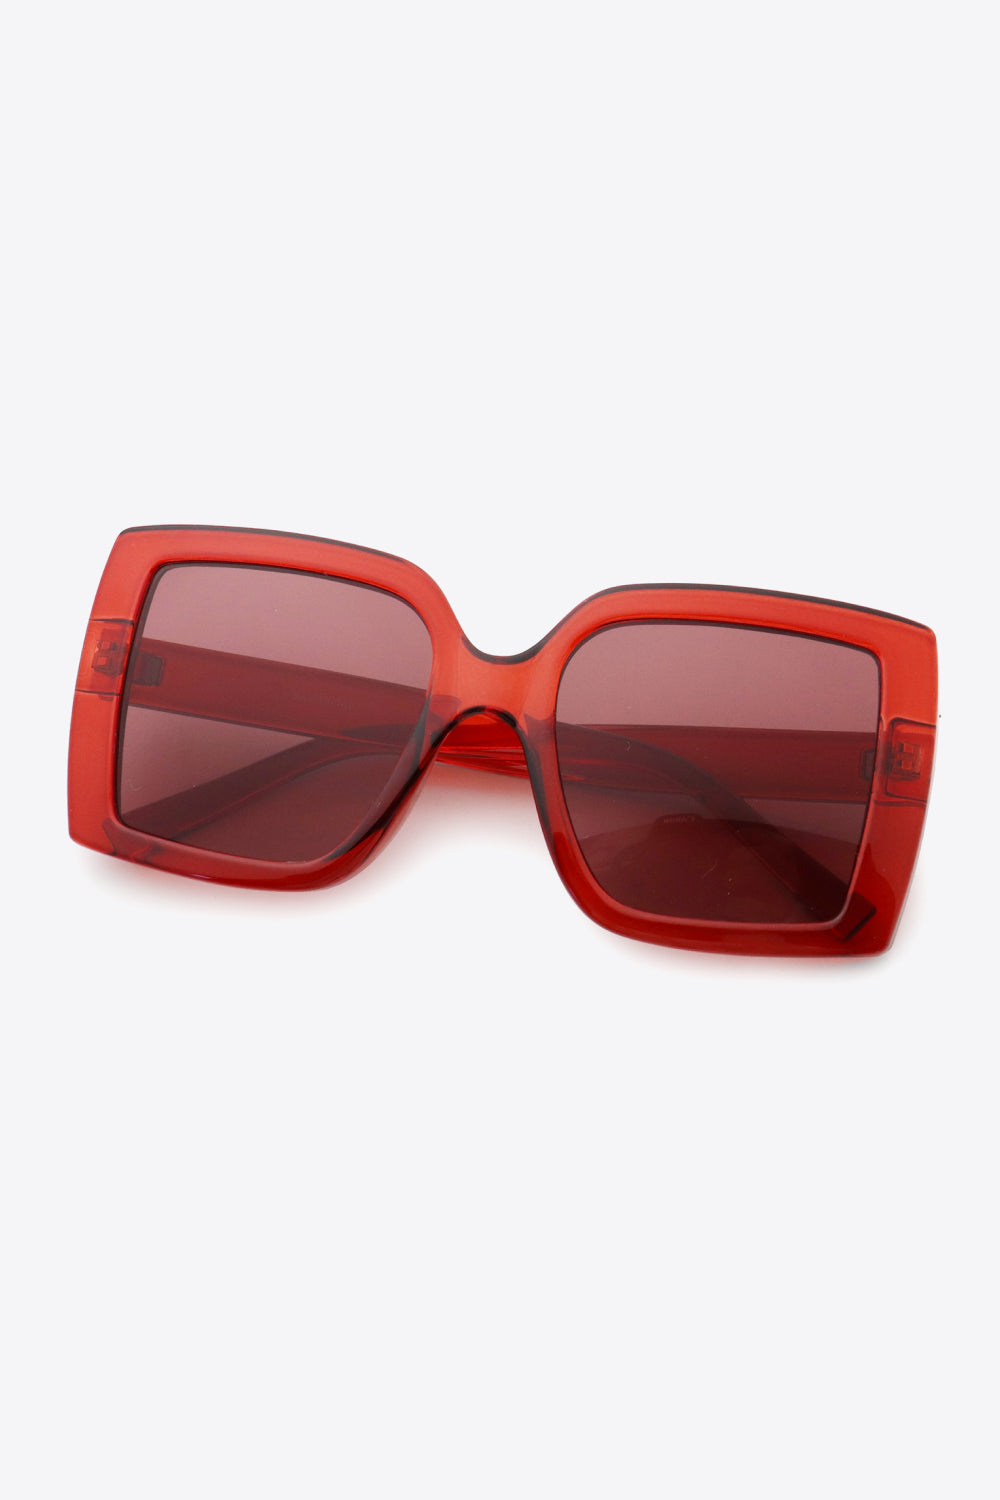 Acetate Lens Square Sunglasses - Deep Red / One Size Girl Code